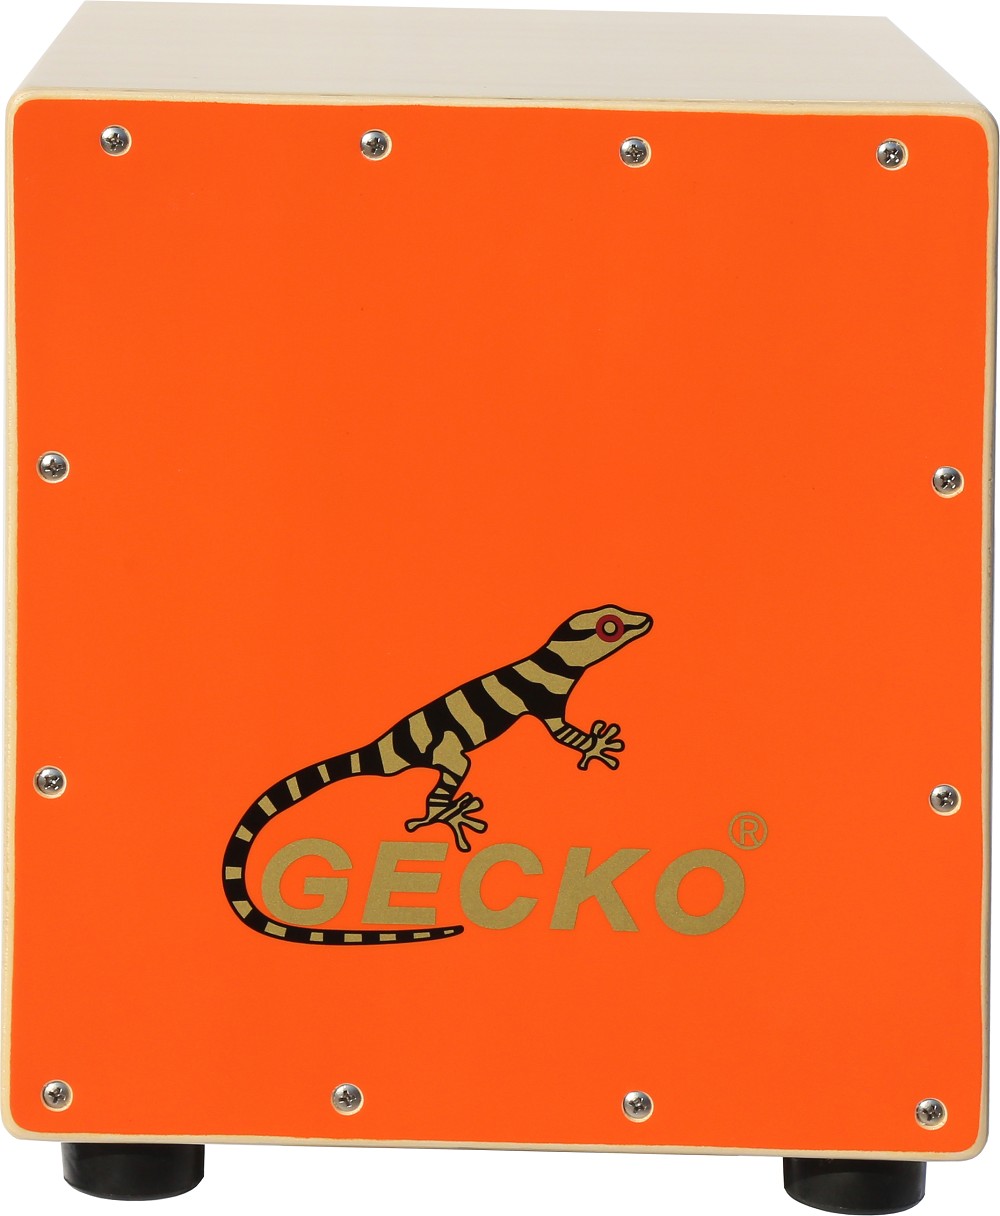 Fast delivery China Supplier -
 Handmade percussion wood box cajon drum kids size with variety colors for practicing – GECKO